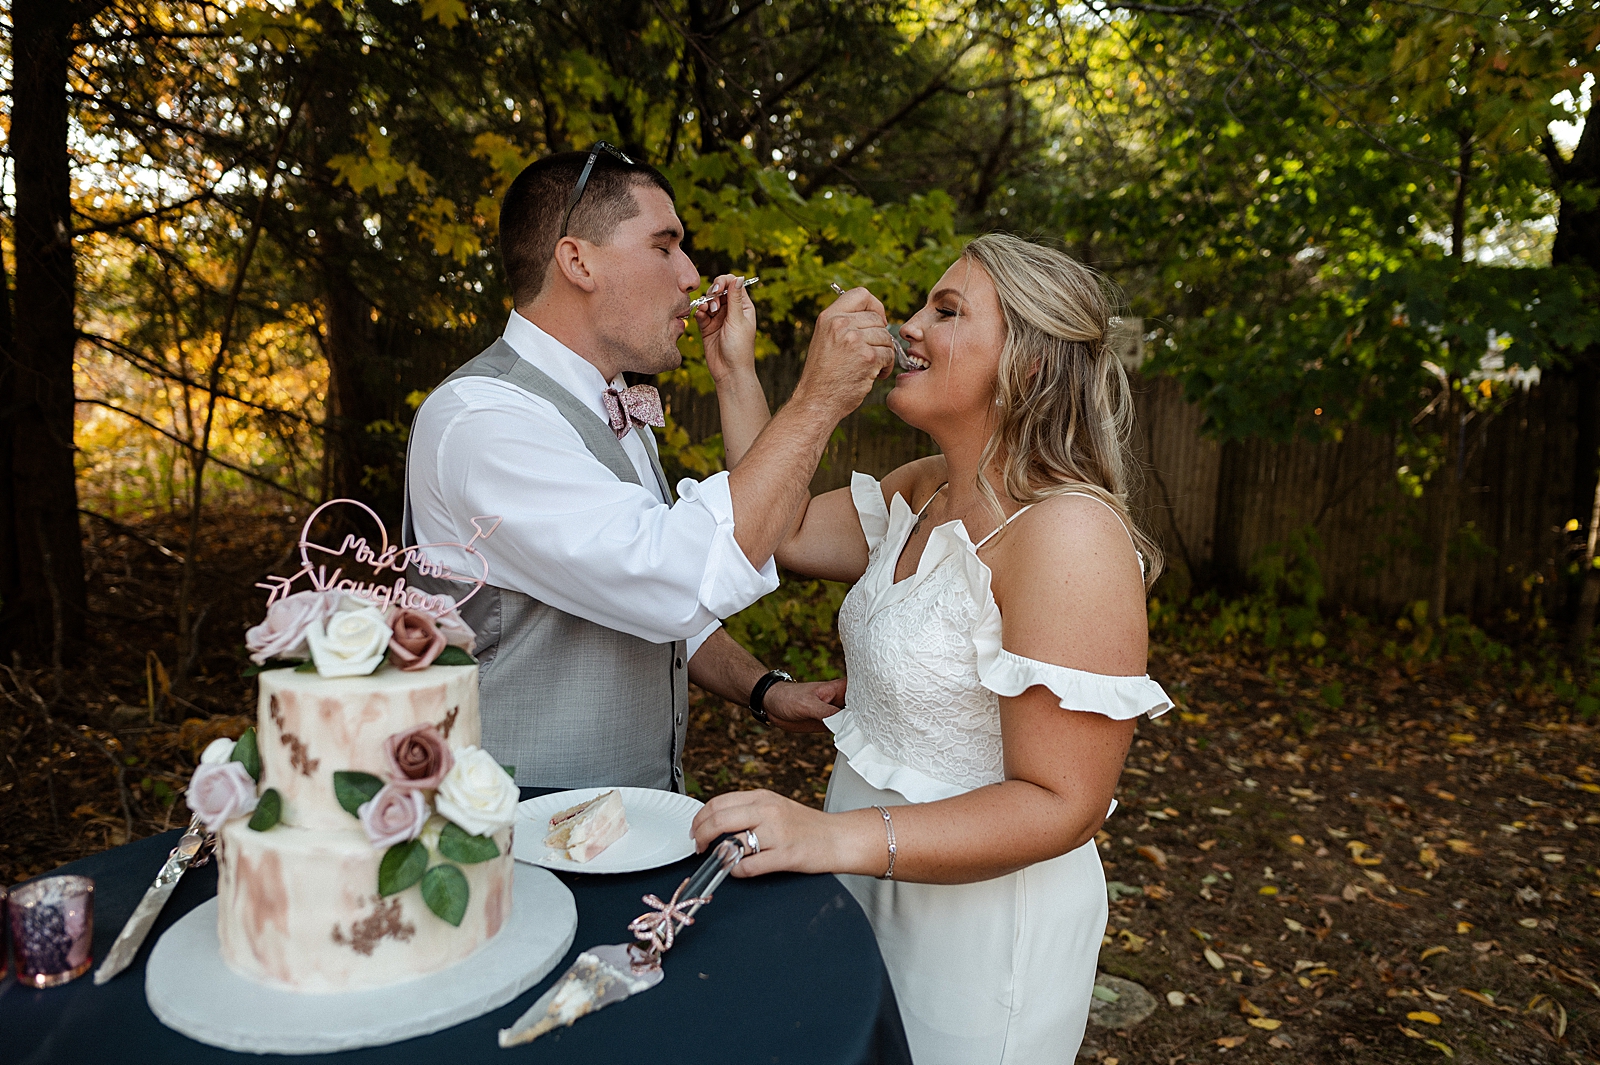 Bride and Groom exchanging cake bites to each other